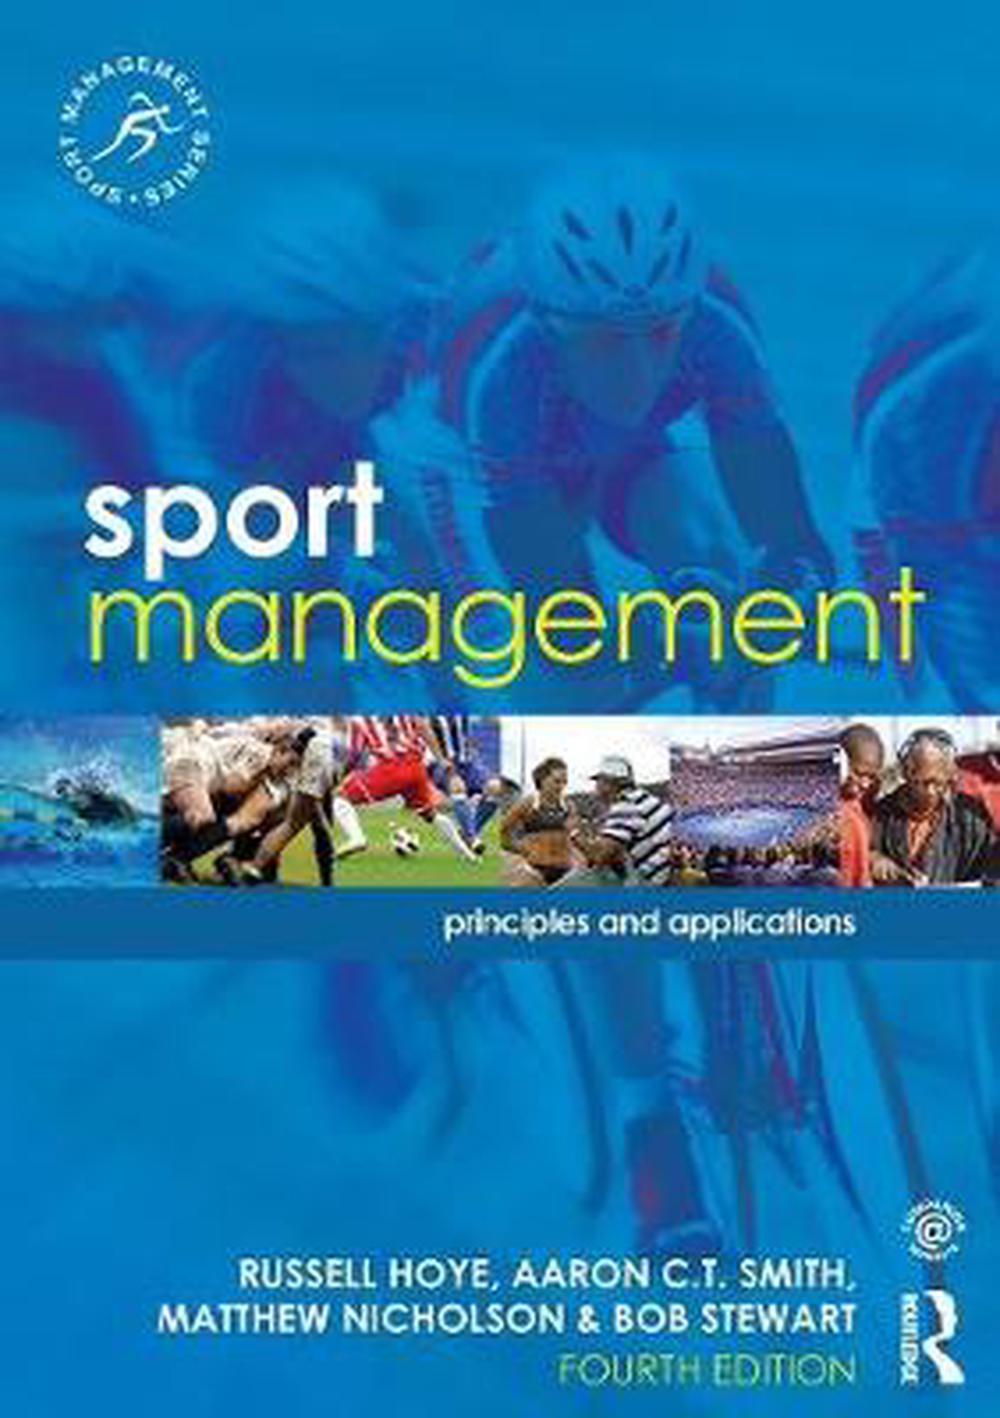 research questions for sport management